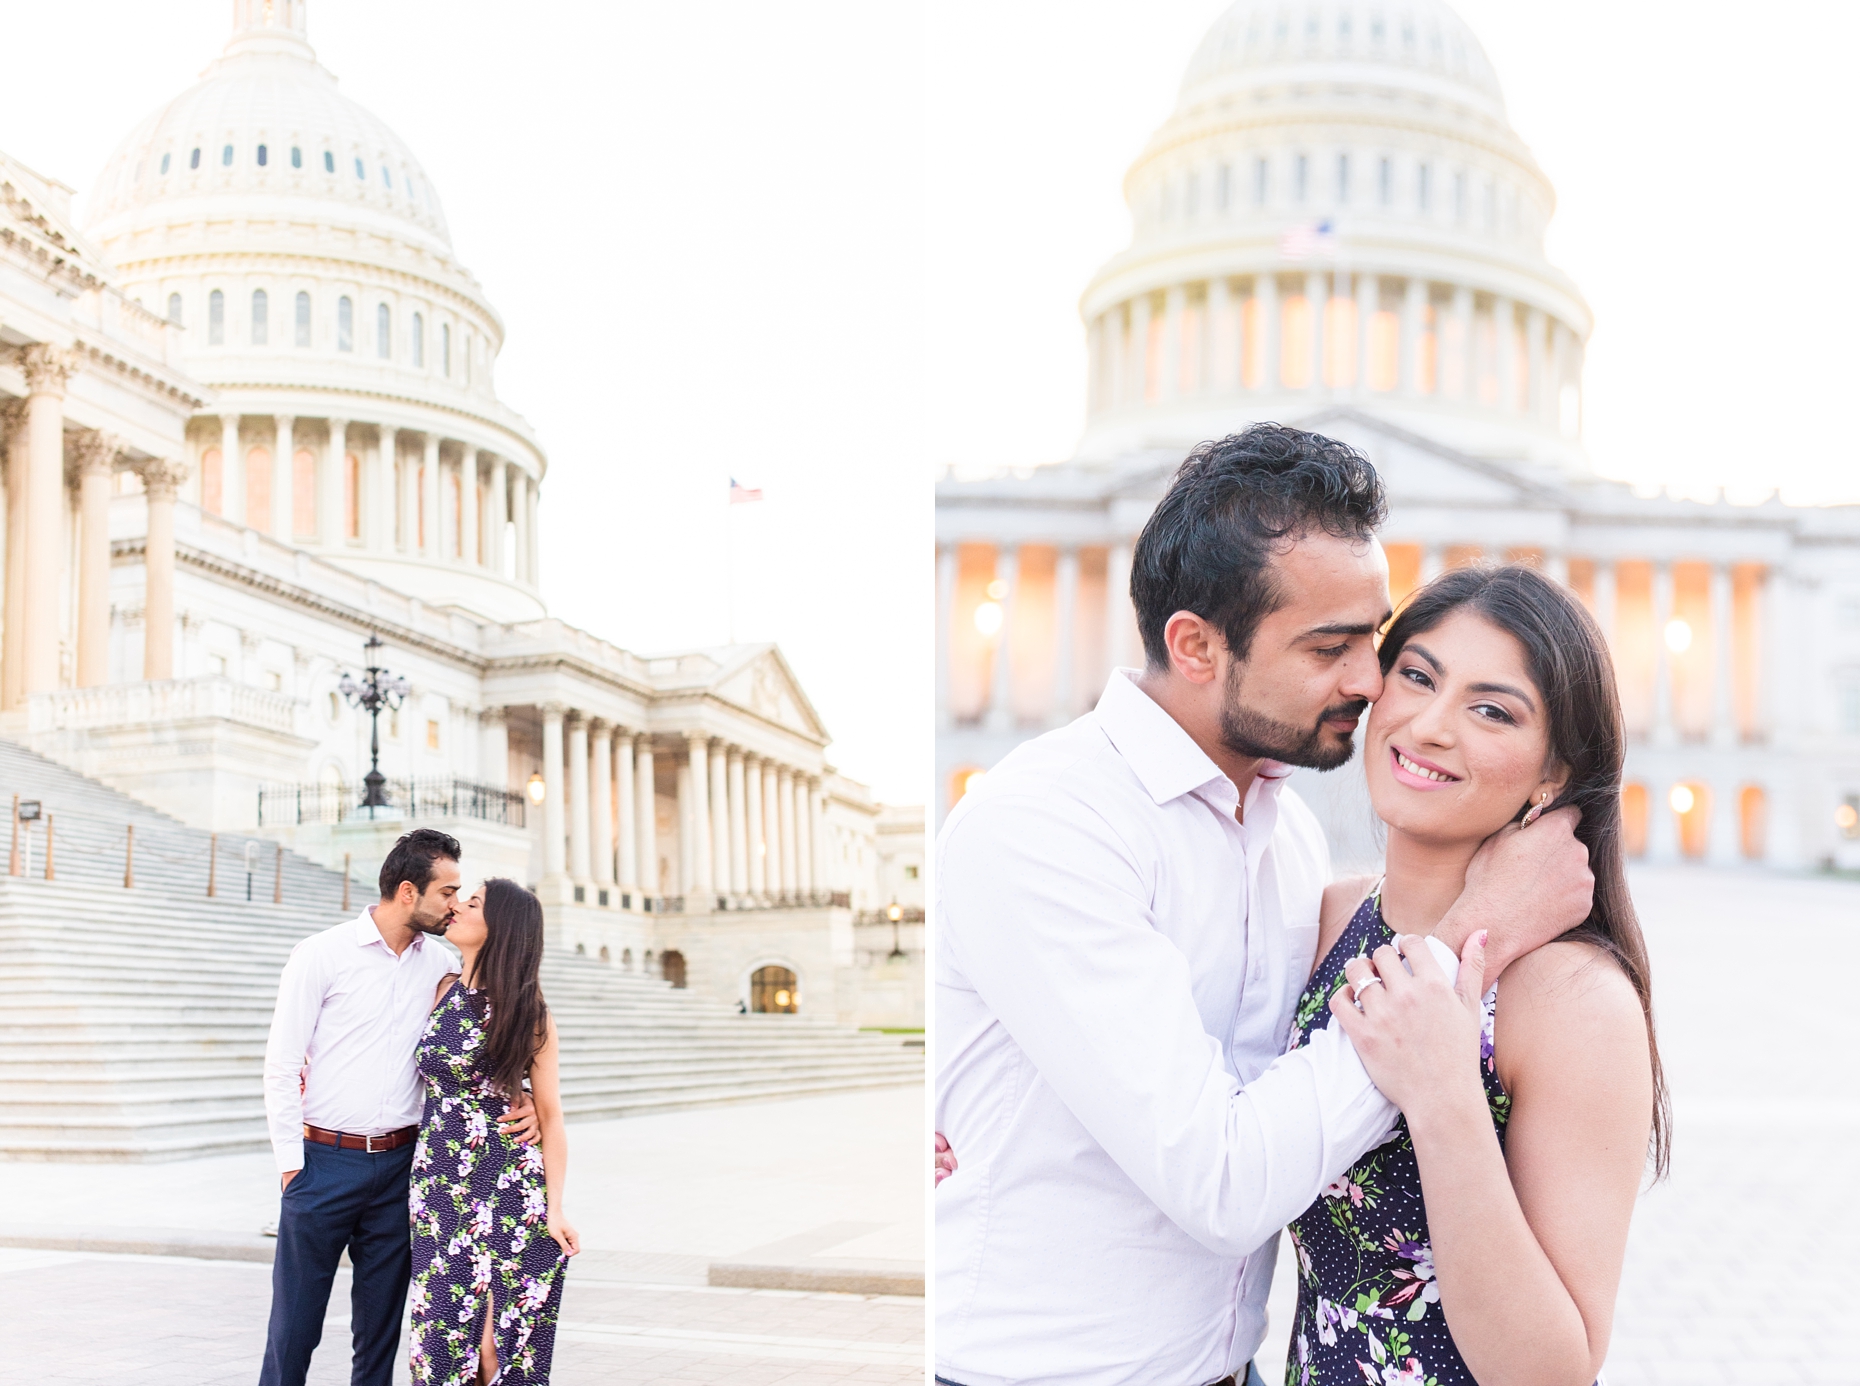 CapitolHillDCEngagementSessionPhotography-ManaliPhotography-021